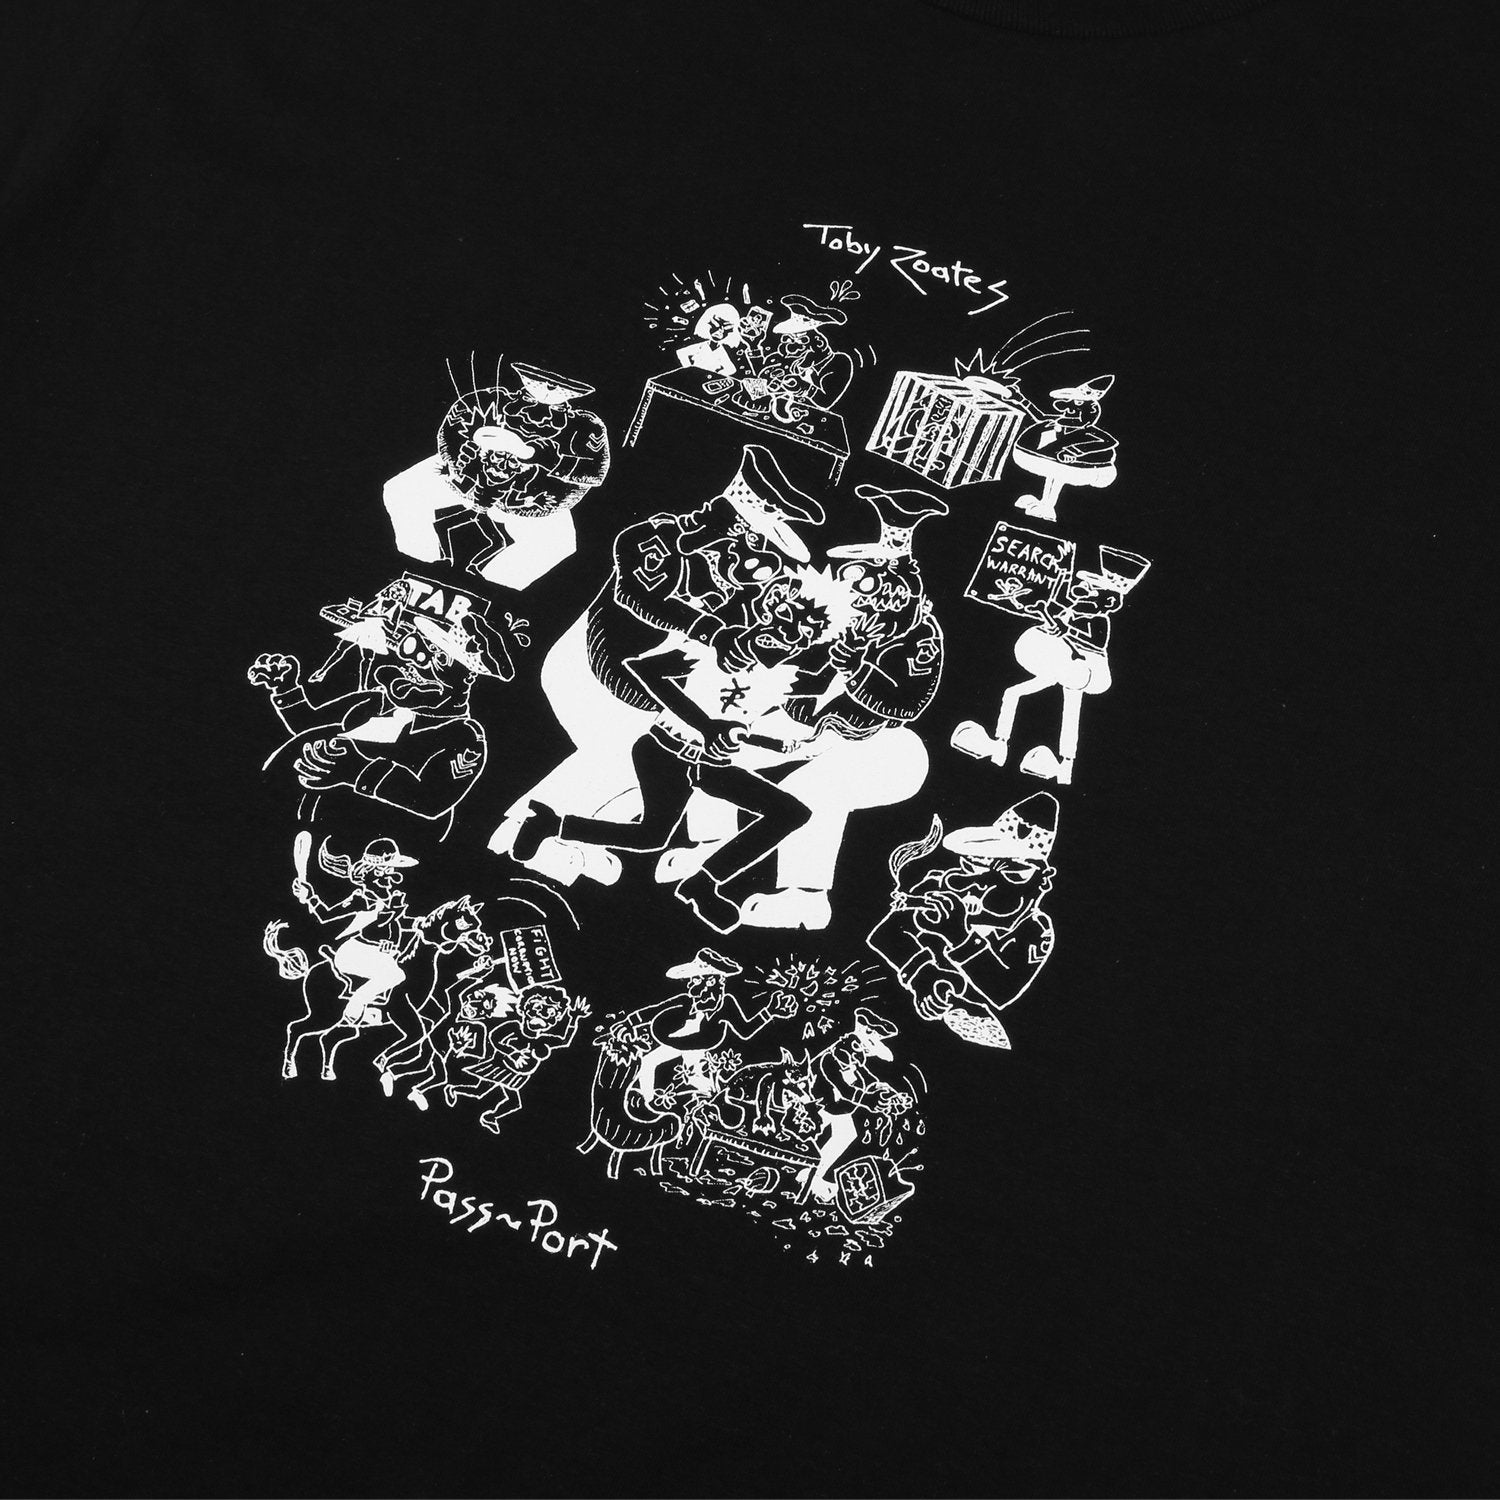 PASS~PORT TOBY ZOATES "COPPERS" TEE BLACK